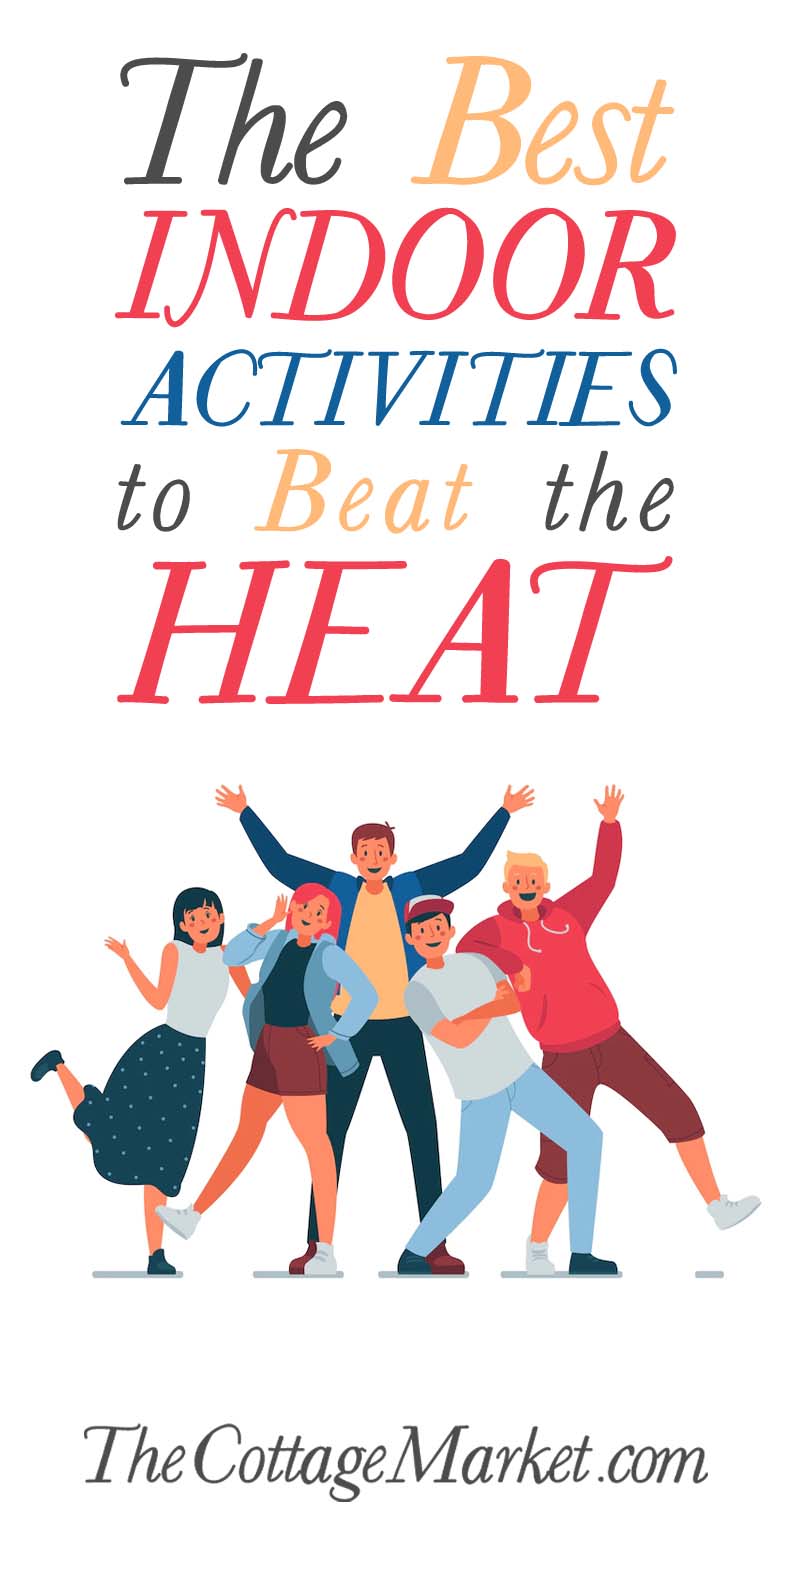 We still have another month of Summer and the weather has been hot hot hot. So here are The Best Indor Activities to Beat the Heat!